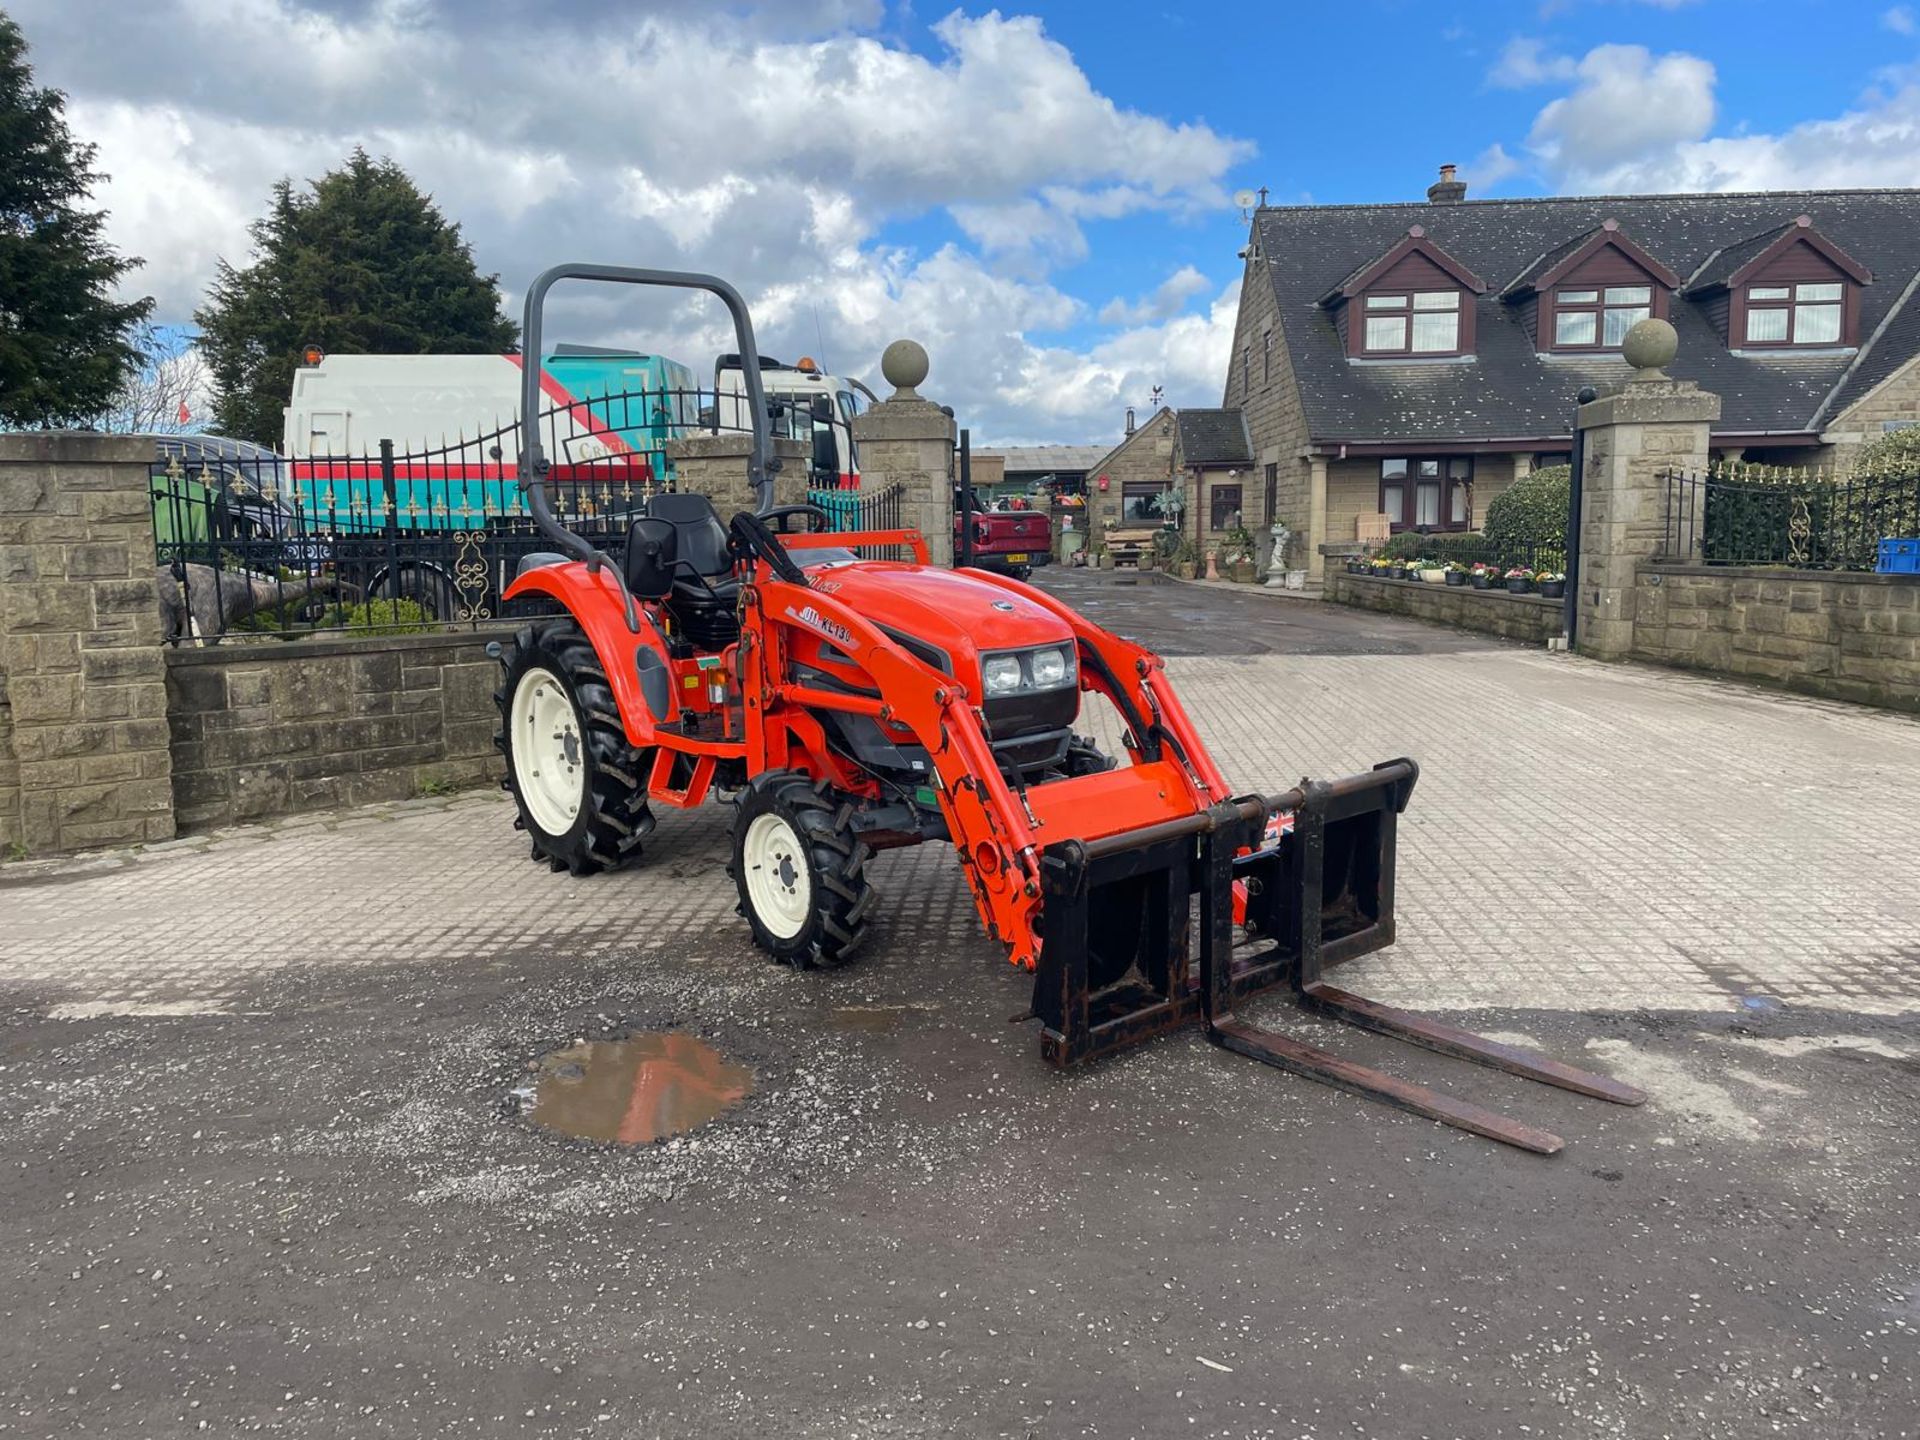 60 REG KIOTI CX27 27HP 4WD COMPACT TRACTOR WITH KIOTI KL130 FRONT LOADER AND PALLET FORKS *PLUS VAT*